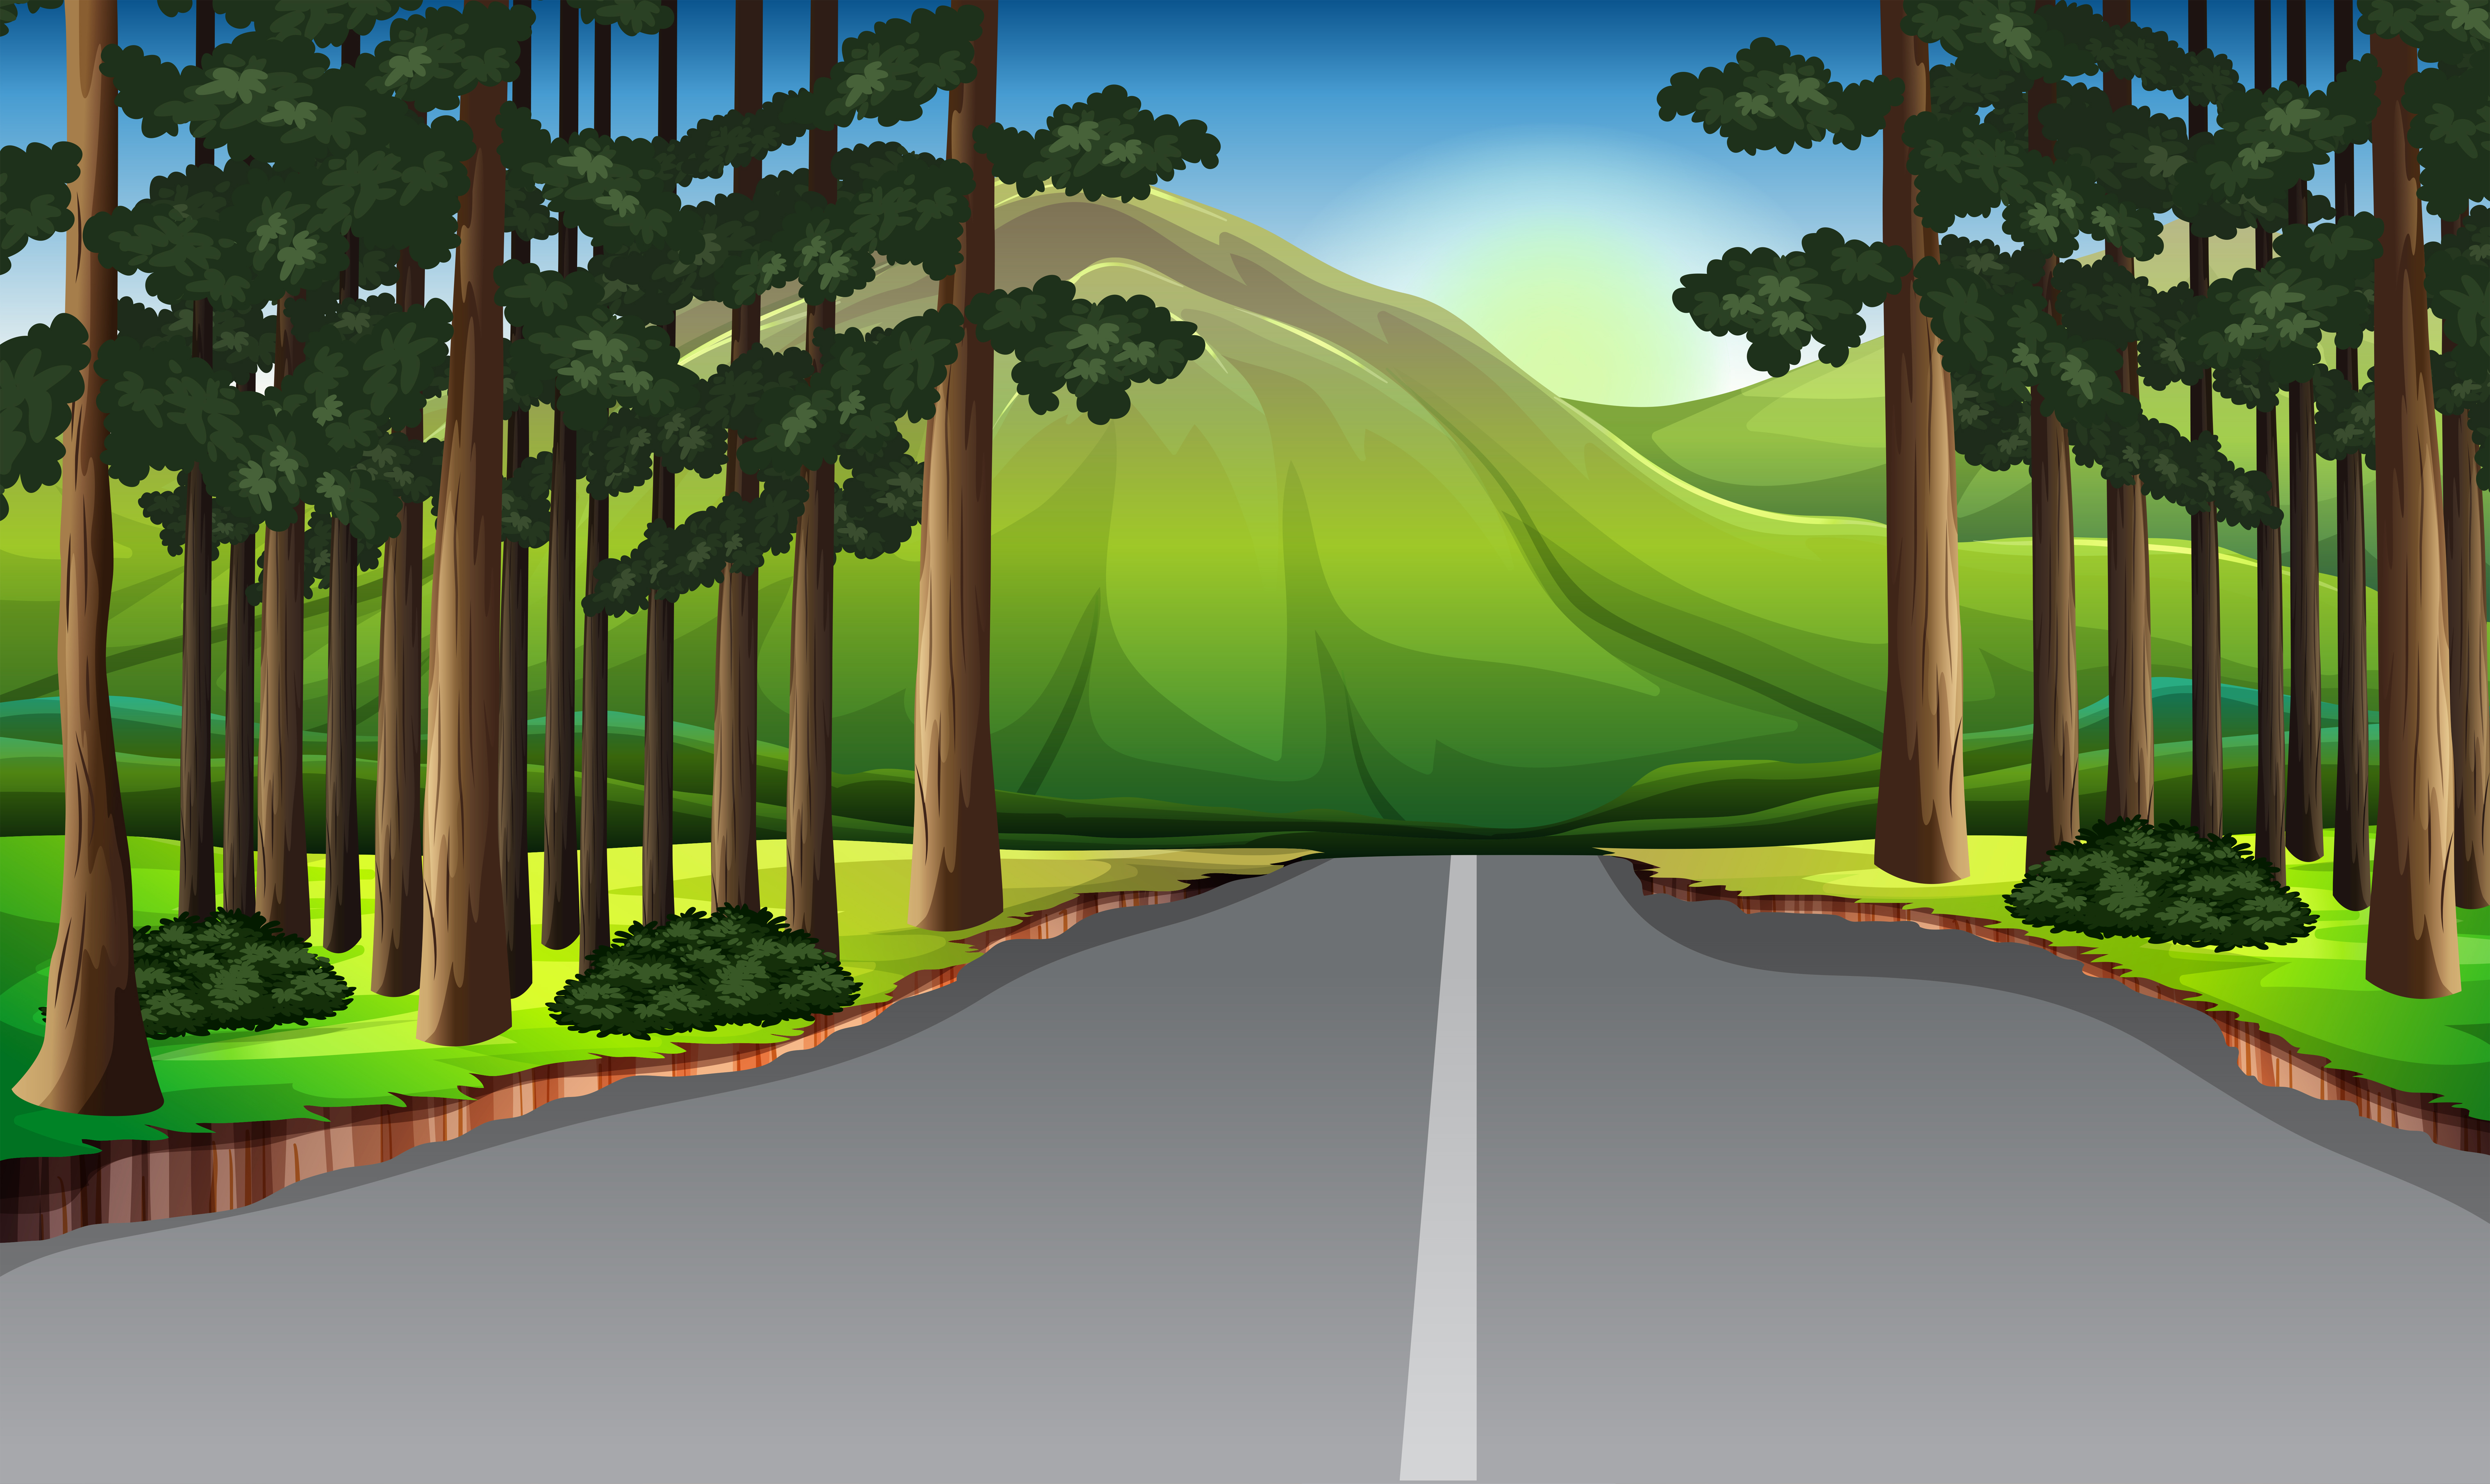 Download Background scene with trees along the road 298125 ...